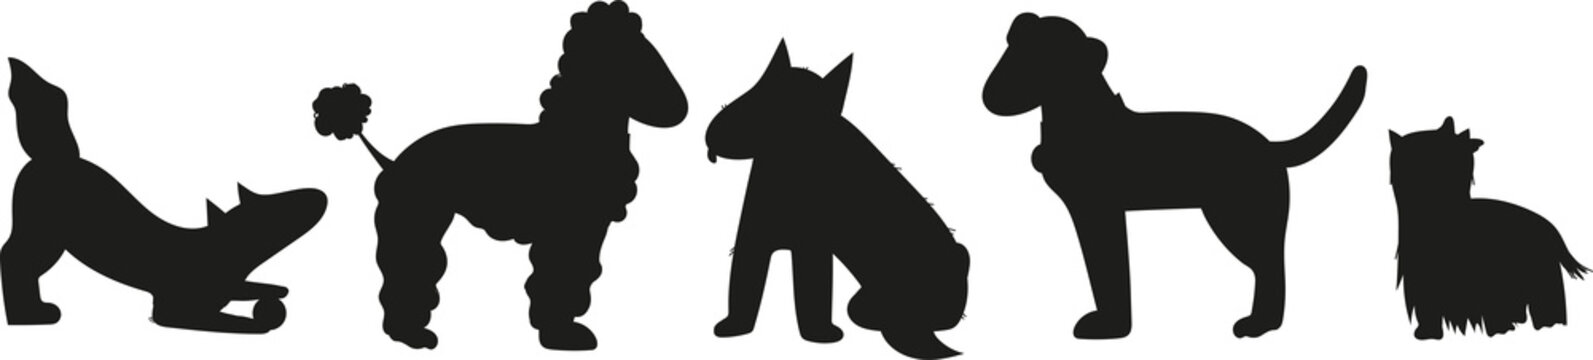 Collection of vector dog breed silhouettes, perfect for design projects, logos. Dogs silhouettes and black contours in row.